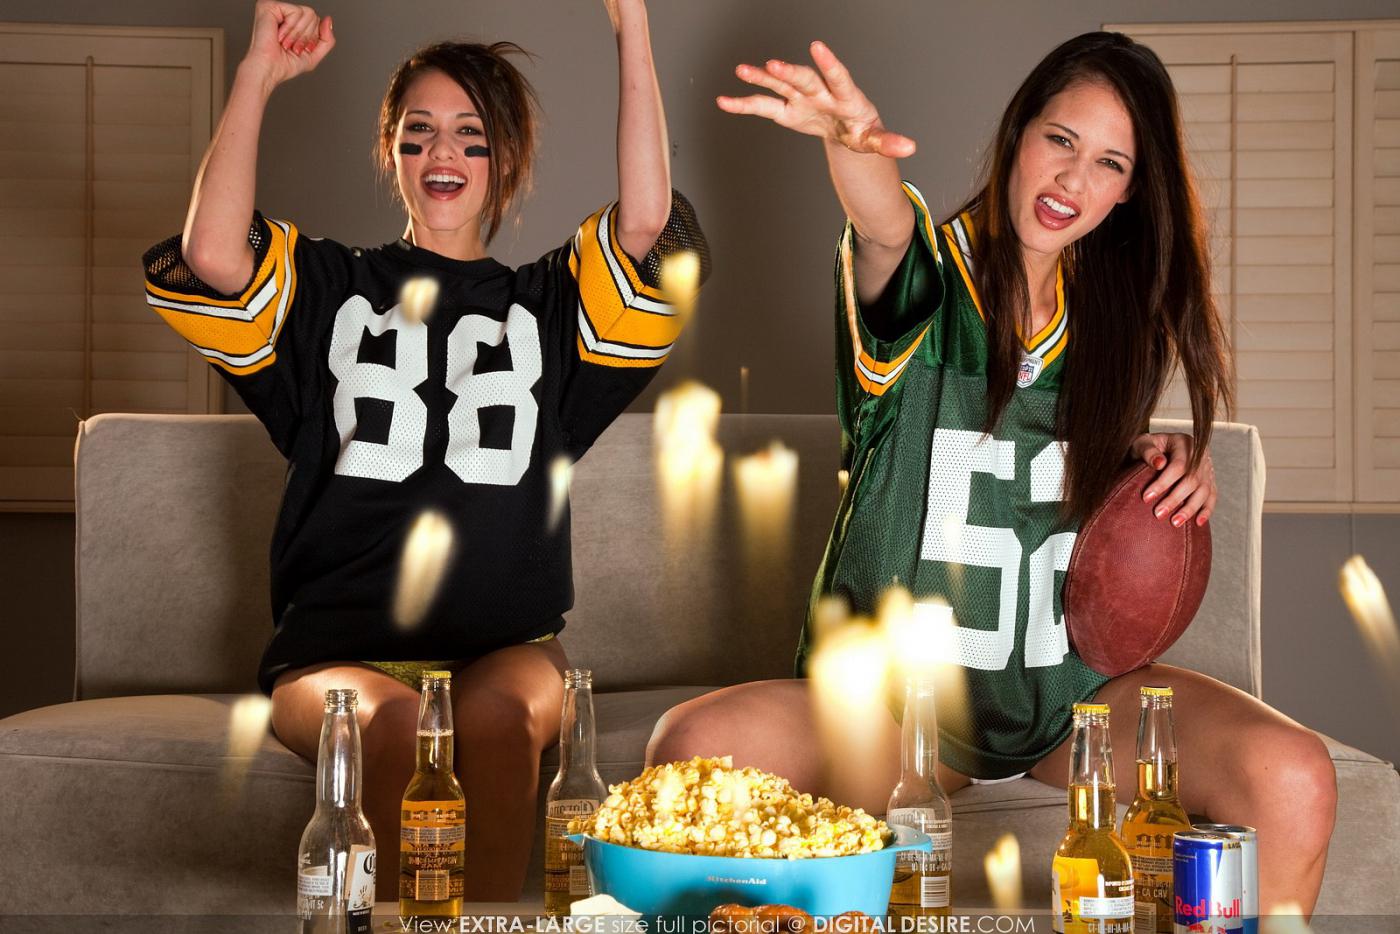 Get noticed at your Super Bowl party with these provocative t-shirts